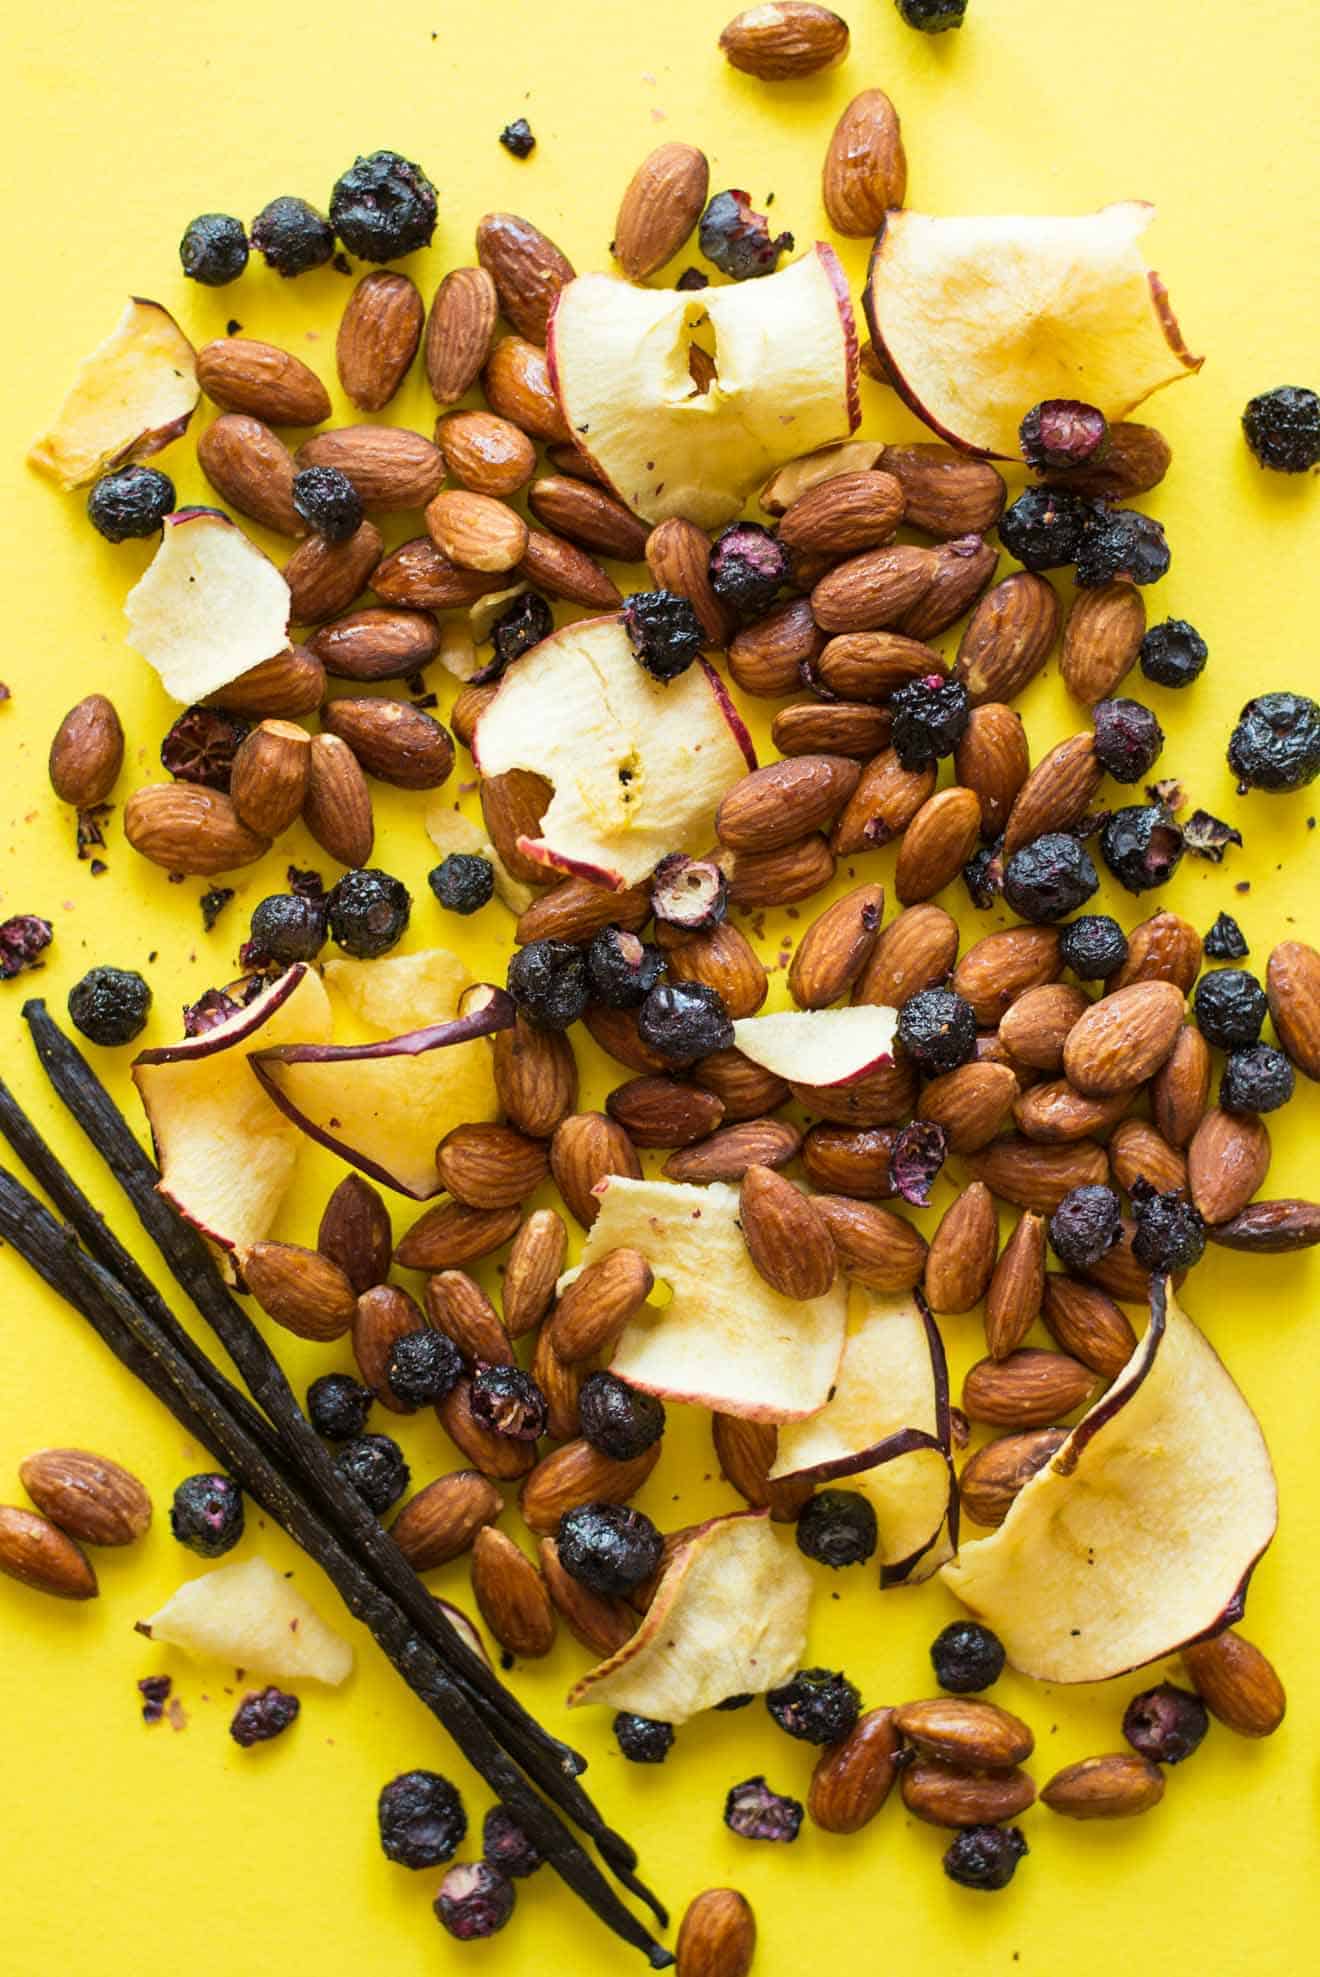 4 Easy Trail Mix Recipes with Almonds - here's 4 healthy snacks that you can make at home! They're gluten free and take only 30 minutes to prepare! by @healthynibs